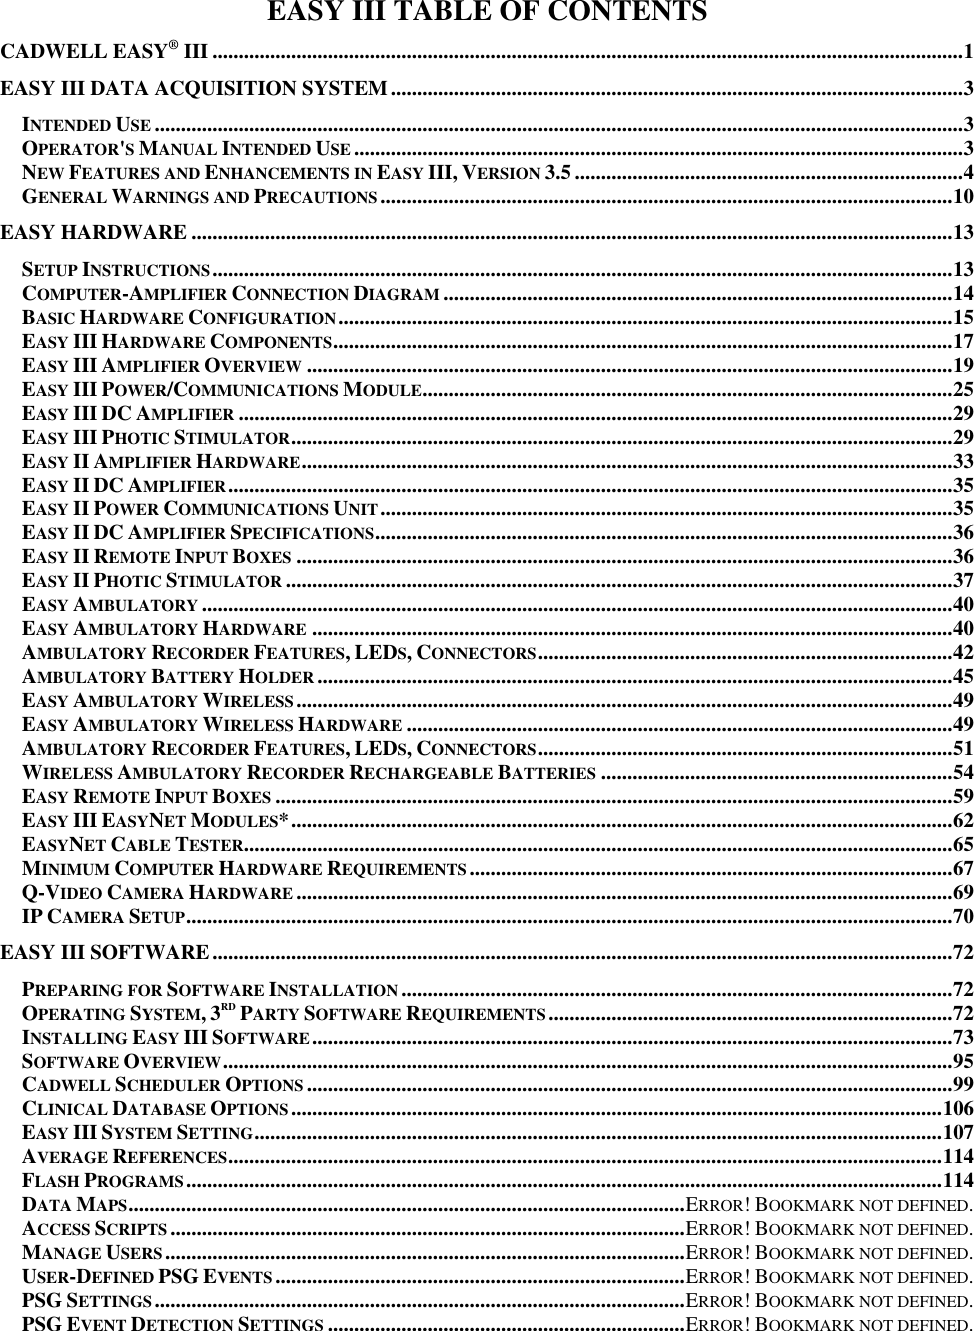   11 EASY III TABLE OF CONTENTS CADWELL EASY® III ............................................................................................................................................... 1 EASY III DATA ACQUISITION SYSTEM ............................................................................................................. 3 INTENDED USE .......................................................................................................................................................... 3 OPERATOR&apos;S MANUAL INTENDED USE .................................................................................................................... 3 NEW FEATURES AND ENHANCEMENTS IN EASY III, VERSION 3.5 .......................................................................... 4 GENERAL WARNINGS AND PRECAUTIONS ............................................................................................................. 10 EASY HARDWARE ................................................................................................................................................. 13 SETUP INSTRUCTIONS ............................................................................................................................................. 13 COMPUTER-AMPLIFIER CONNECTION DIAGRAM ................................................................................................. 14 BASIC HARDWARE CONFIGURATION ..................................................................................................................... 15 EASY III HARDWARE COMPONENTS ...................................................................................................................... 17 EASY III AMPLIFIER OVERVIEW ........................................................................................................................... 19 EASY III POWER/COMMUNICATIONS MODULE ..................................................................................................... 25 EASY III DC AMPLIFIER ........................................................................................................................................ 29 EASY III PHOTIC STIMULATOR .............................................................................................................................. 29 EASY II AMPLIFIER HARDWARE ............................................................................................................................ 33 EASY II DC AMPLIFIER .......................................................................................................................................... 35 EASY II POWER COMMUNICATIONS UNIT ............................................................................................................. 35 EASY II DC AMPLIFIER SPECIFICATIONS .............................................................................................................. 36 EASY II REMOTE INPUT BOXES ............................................................................................................................. 36 EASY II PHOTIC STIMULATOR ............................................................................................................................... 37 EASY AMBULATORY ............................................................................................................................................... 40 EASY AMBULATORY HARDWARE .......................................................................................................................... 40 AMBULATORY RECORDER FEATURES, LEDS, CONNECTORS ............................................................................... 42 AMBULATORY BATTERY HOLDER ......................................................................................................................... 45 EASY AMBULATORY WIRELESS ............................................................................................................................. 49 EASY AMBULATORY WIRELESS HARDWARE ........................................................................................................ 49 AMBULATORY RECORDER FEATURES, LEDS, CONNECTORS ............................................................................... 51 WIRELESS AMBULATORY RECORDER RECHARGEABLE BATTERIES ................................................................... 54 EASY REMOTE INPUT BOXES ................................................................................................................................. 59 EASY III EASYNET MODULES* .............................................................................................................................. 62 EASYNET CABLE TESTER....................................................................................................................................... 65 MINIMUM COMPUTER HARDWARE REQUIREMENTS ............................................................................................ 67 Q-VIDEO CAMERA HARDWARE ............................................................................................................................. 69 IP CAMERA SETUP .................................................................................................................................................. 70 EASY III SOFTWARE ............................................................................................................................................. 72 PREPARING FOR SOFTWARE INSTALLATION ......................................................................................................... 72 OPERATING SYSTEM, 3RD PARTY SOFTWARE REQUIREMENTS ............................................................................. 72 INSTALLING EASY III SOFTWARE .......................................................................................................................... 73 SOFTWARE OVERVIEW ........................................................................................................................................... 95 CADWELL SCHEDULER OPTIONS ........................................................................................................................... 99 CLINICAL DATABASE OPTIONS ............................................................................................................................ 106 EASY III SYSTEM SETTING ................................................................................................................................... 107 AVERAGE REFERENCES ........................................................................................................................................ 114 FLASH PROGRAMS ................................................................................................................................................ 114 DATA MAPS .......................................................................................................... ERROR! BOOKMARK NOT DEFINED. ACCESS SCRIPTS .................................................................................................. ERROR! BOOKMARK NOT DEFINED. MANAGE USERS ................................................................................................... ERROR! BOOKMARK NOT DEFINED. USER-DEFINED PSG EVENTS .............................................................................. ERROR! BOOKMARK NOT DEFINED. PSG SETTINGS ..................................................................................................... ERROR! BOOKMARK NOT DEFINED. PSG EVENT DETECTION SETTINGS .................................................................... ERROR! BOOKMARK NOT DEFINED. 